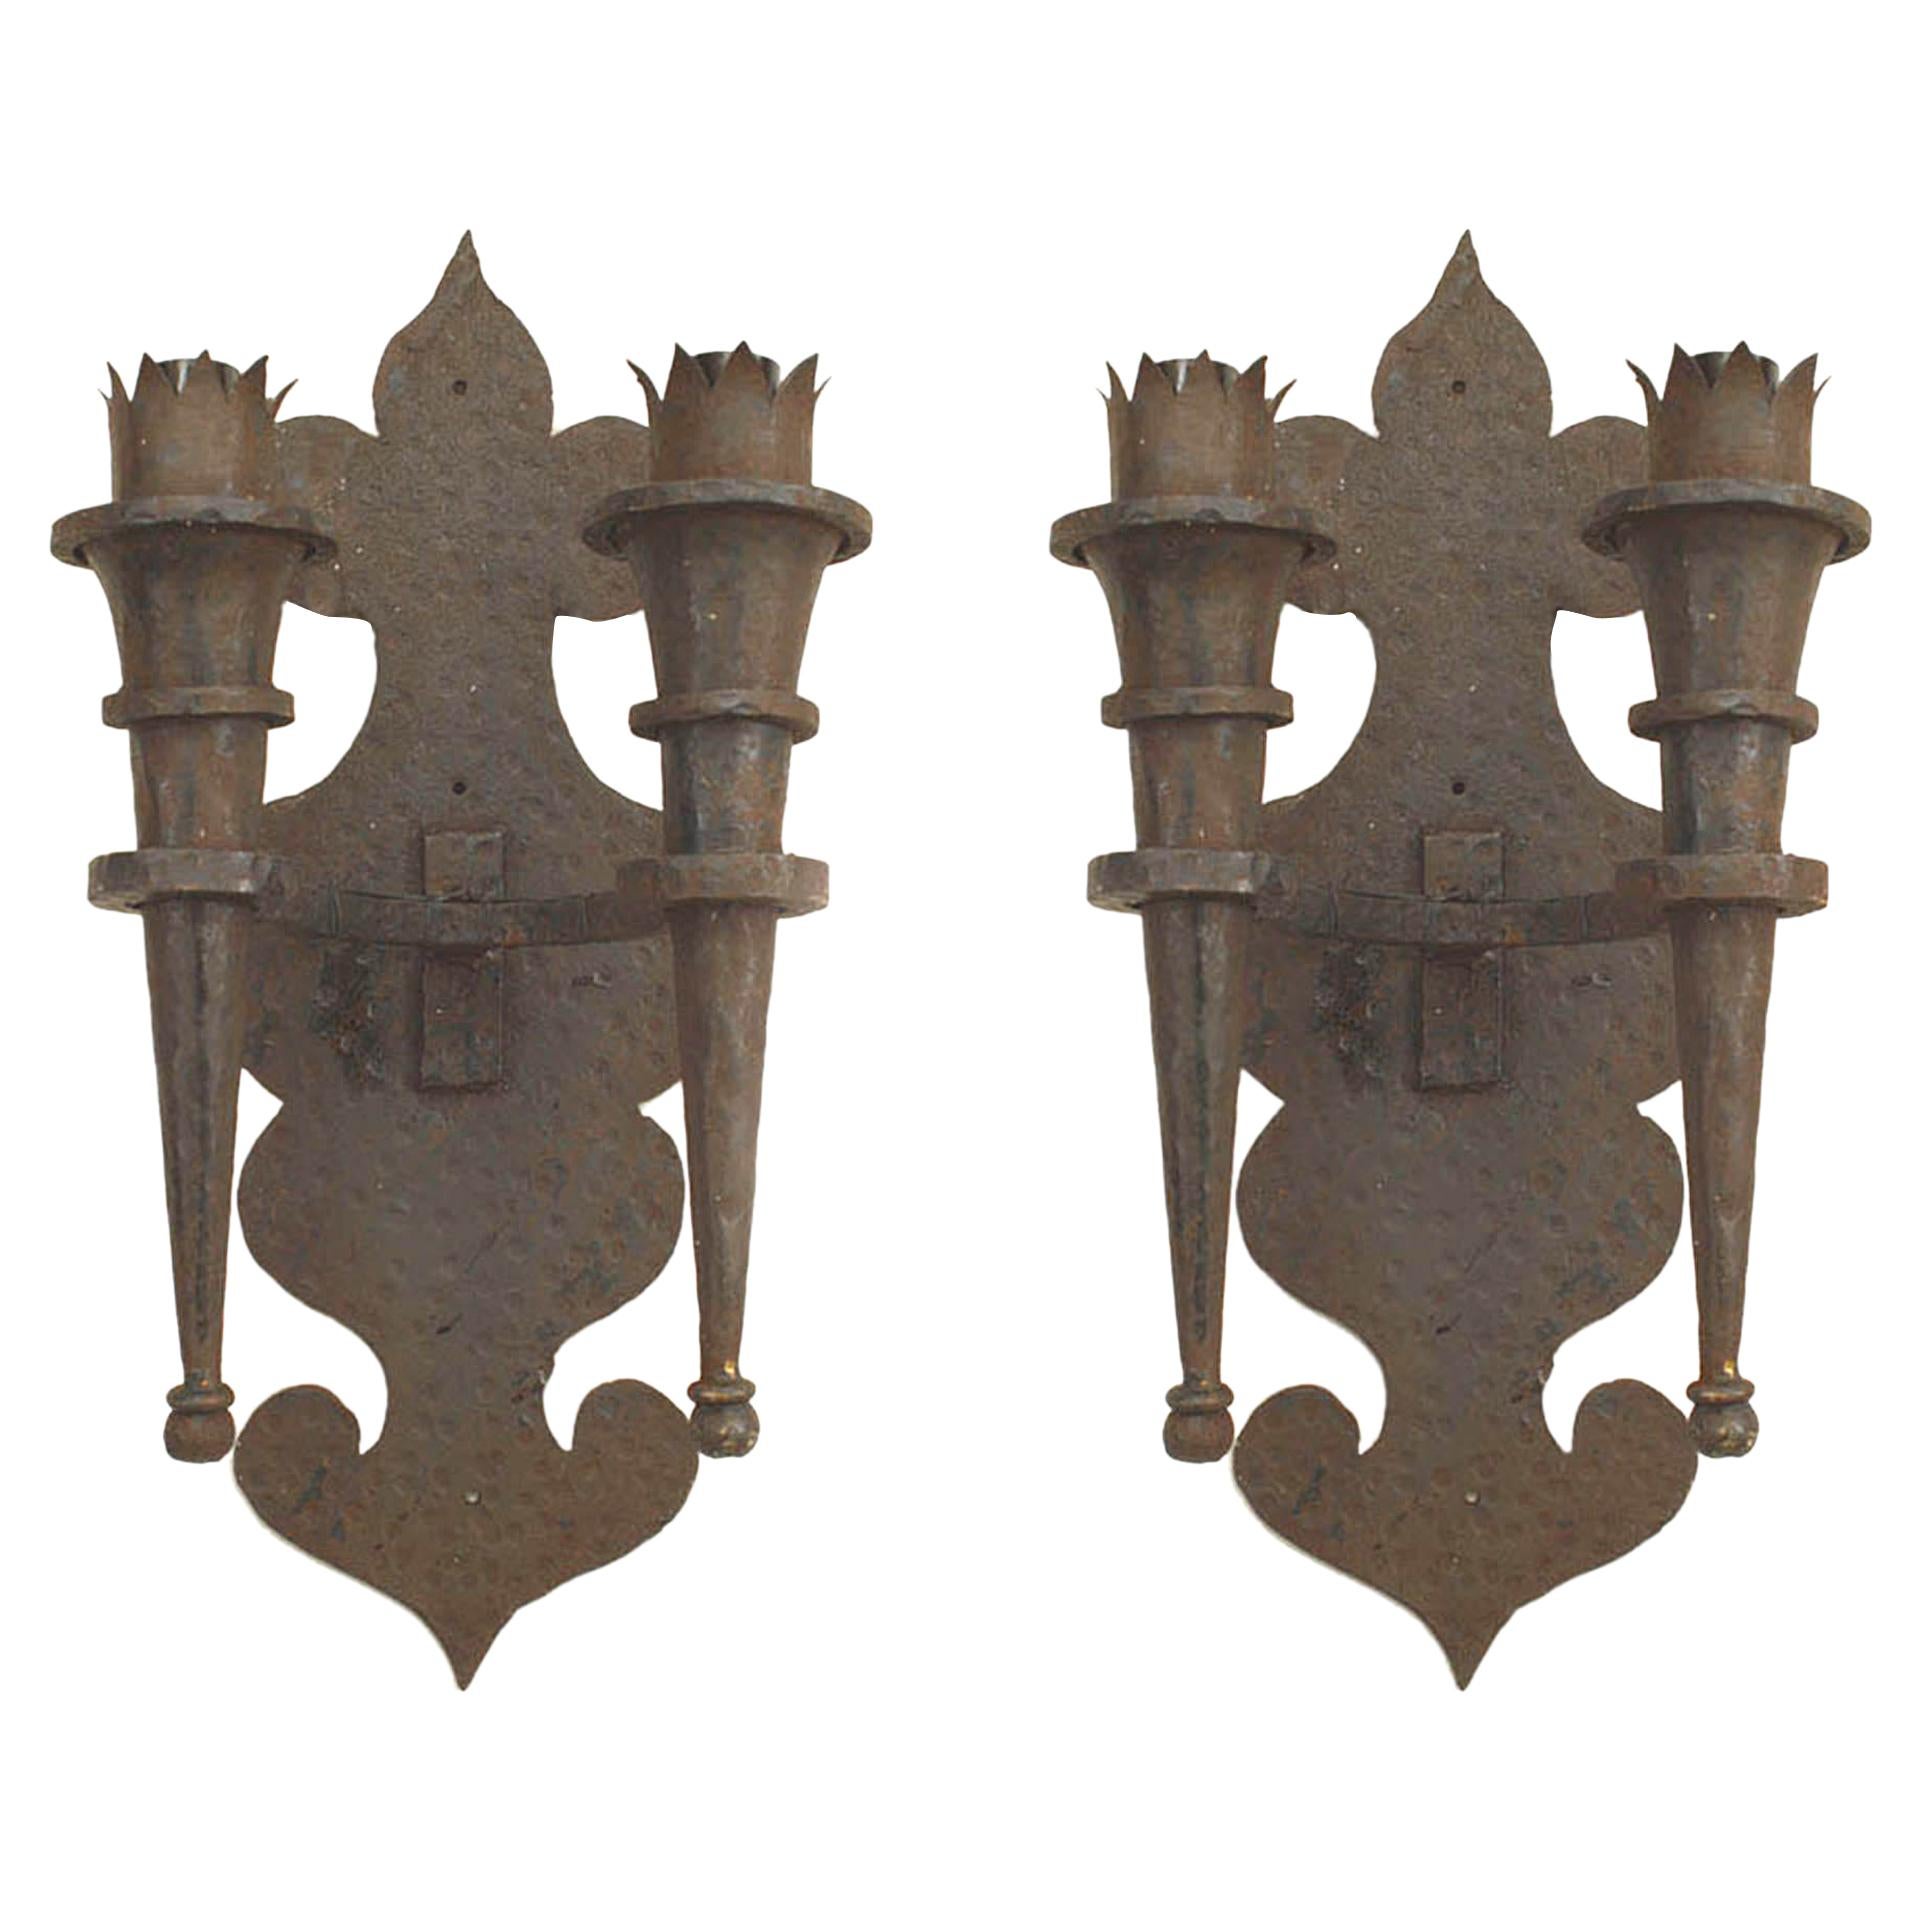 Pair of American Renaissance Revival Iron Torch Wall Sconces